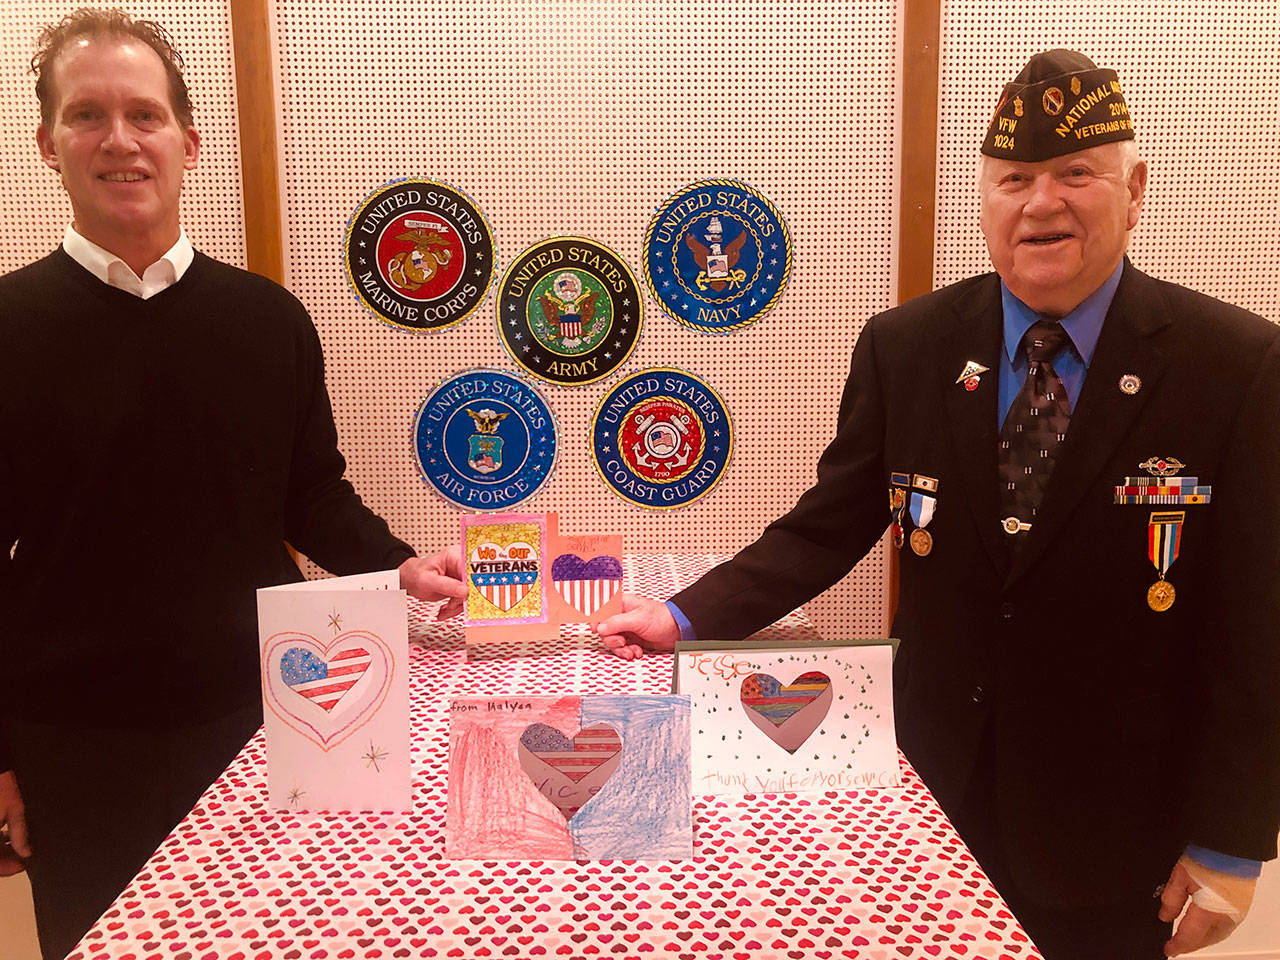 Funeral home co-owner and founder, Steve Ford, left, and Gerald “Jerry” Rettela of the Korean War Veterans Association #310, show some of the valentine cards collected by the funeral home’s 10th annual Operation Valentine program. The cards were created by most Clallam County school students and teachers, area scouts, youth groups, churches, businesses and local residents. The hundreds of cards will be personally distributed by Retella to active duty personnel, and veterans both locally and regionally. For more information, call Ford at 360-457-1210, email to info@drennanford.com or see www.drennanford.com or www.facebook.com/drennanfordfuneralhome. Submitted photo